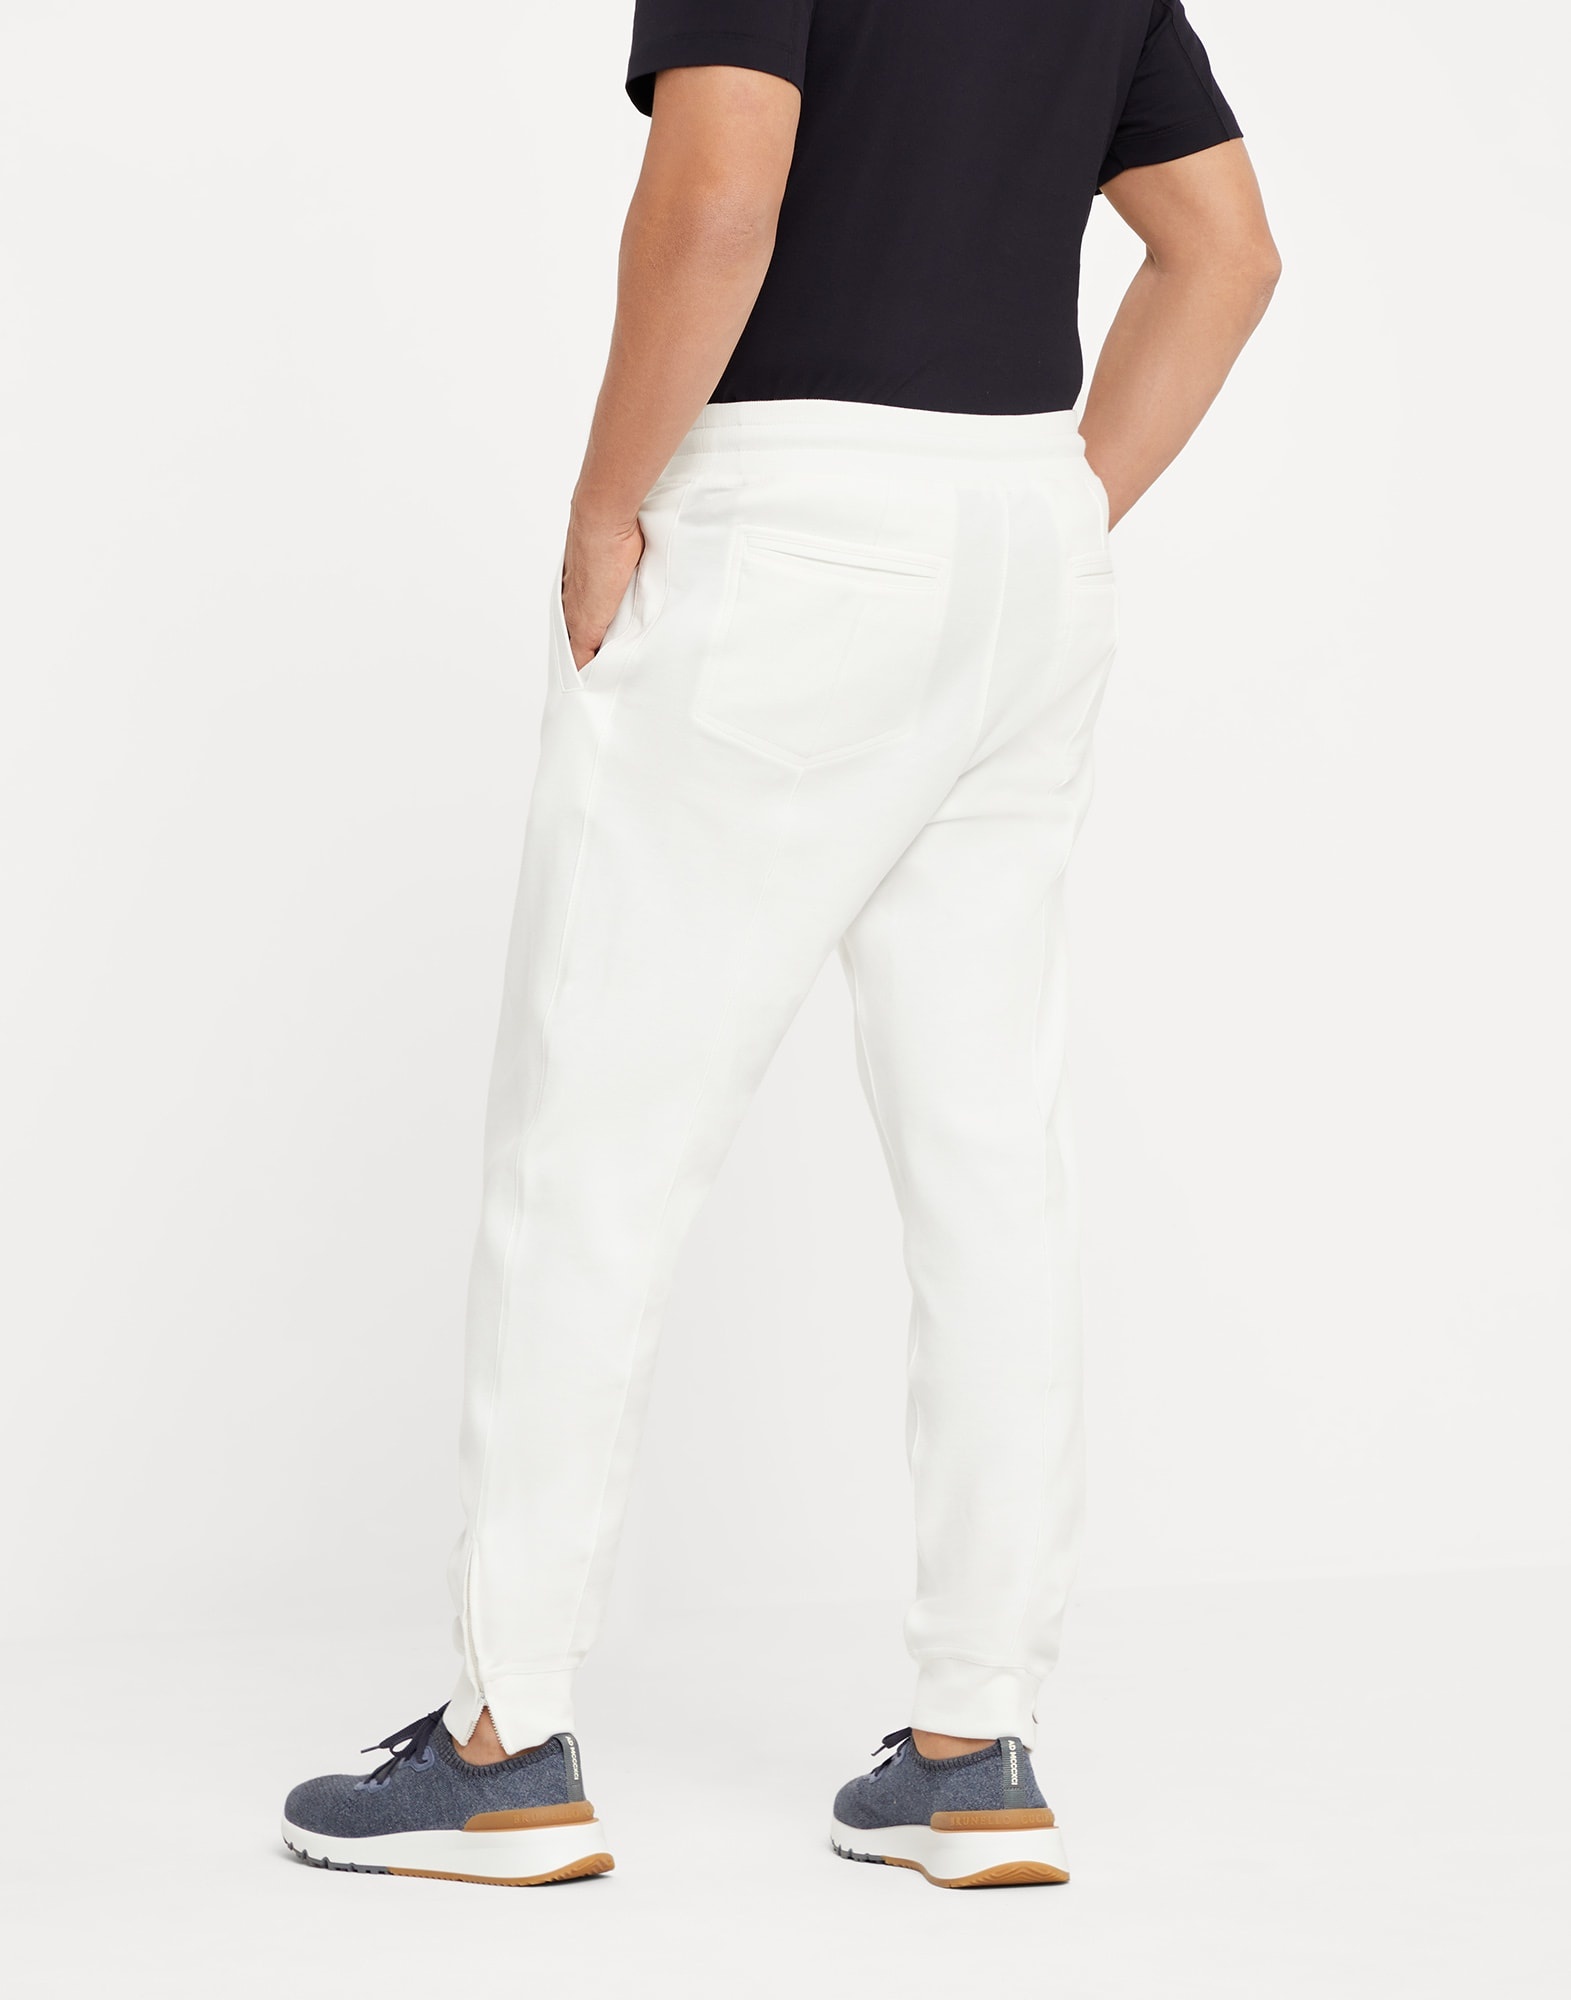 Techno cotton lightweight French terry trousers with crête detail and elasticated zipper cuffs - 2